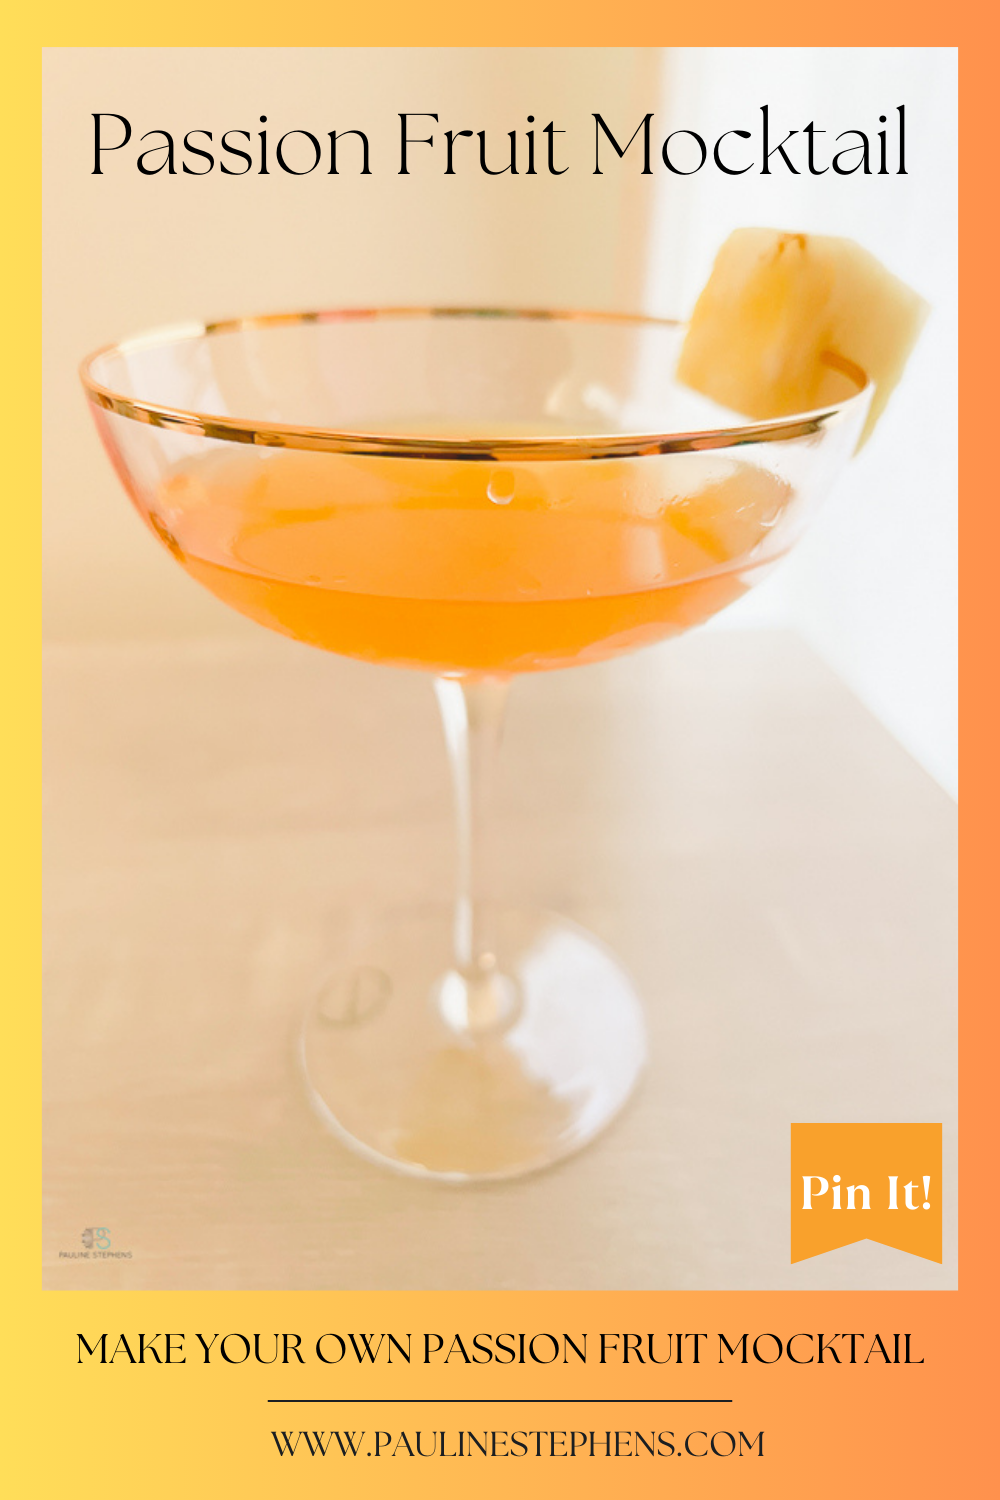 A gold rimmed glass filled with Passion Fruit Mocktail and garnished with a slice of pineapple.